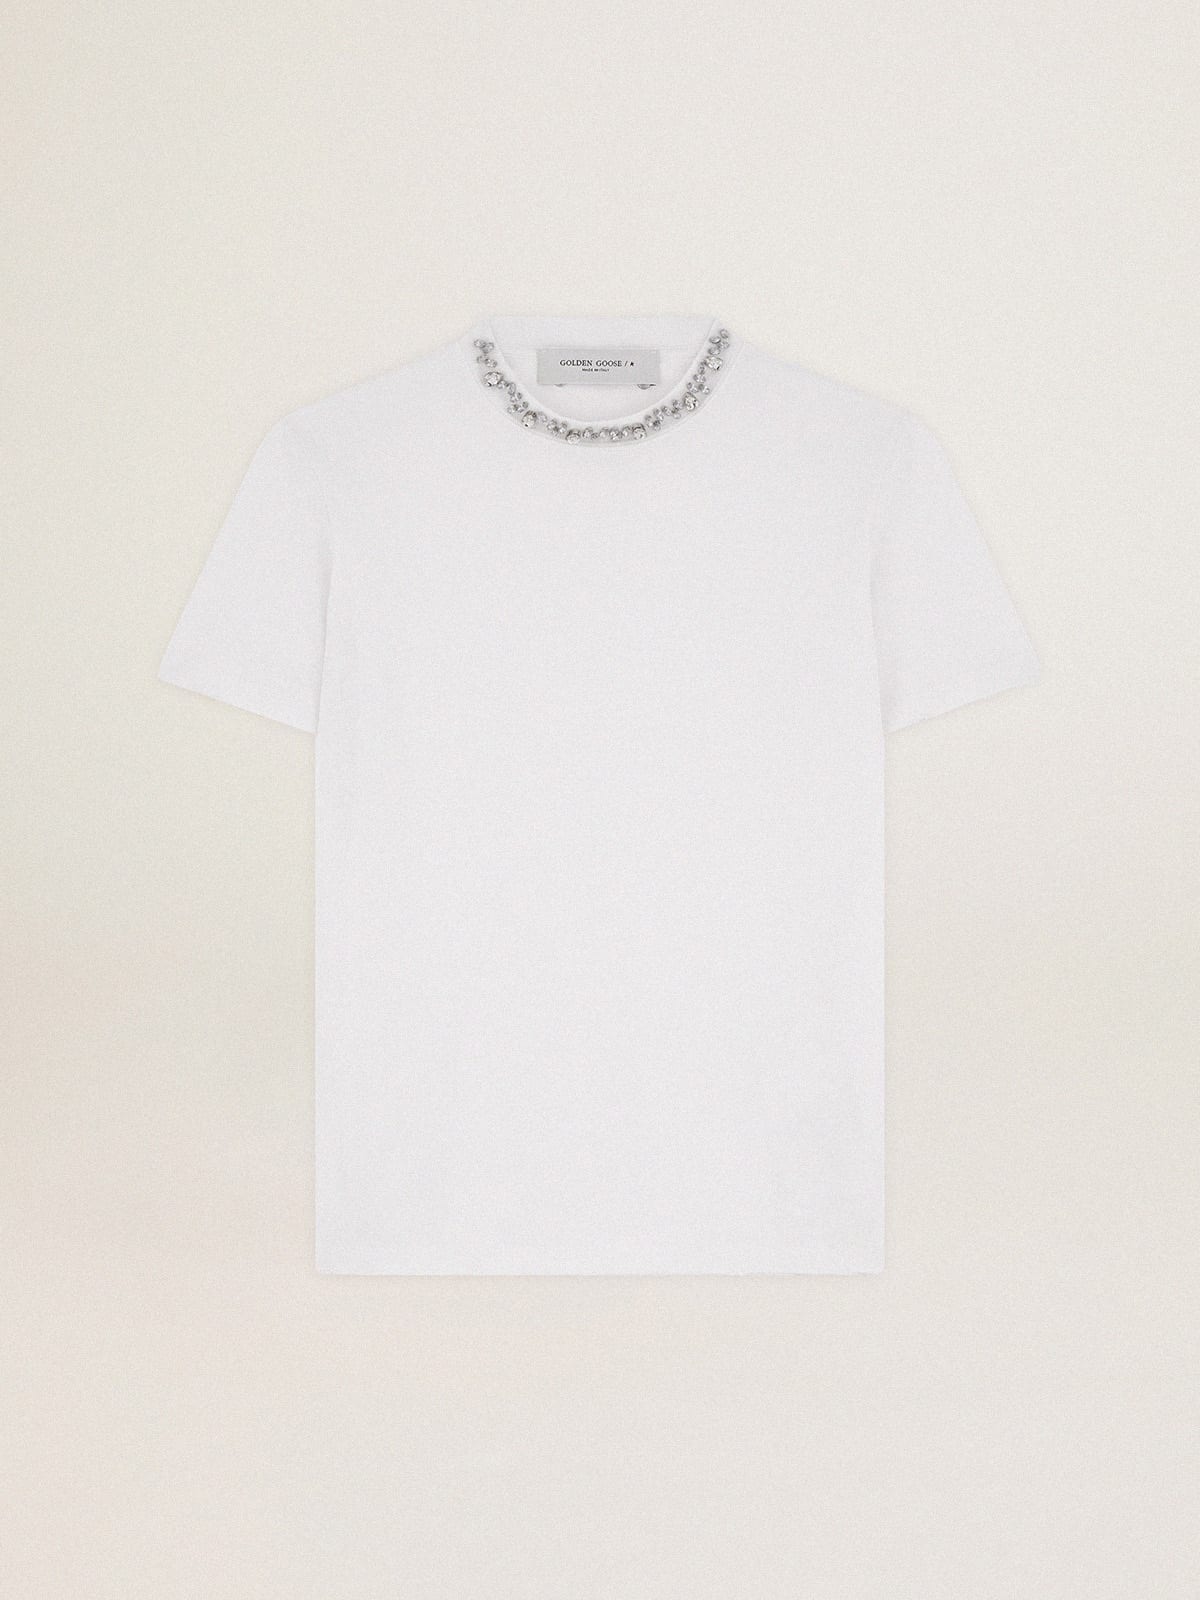 Golden Goose - Golden Collection T-shirt in white with cabochon crystals in 